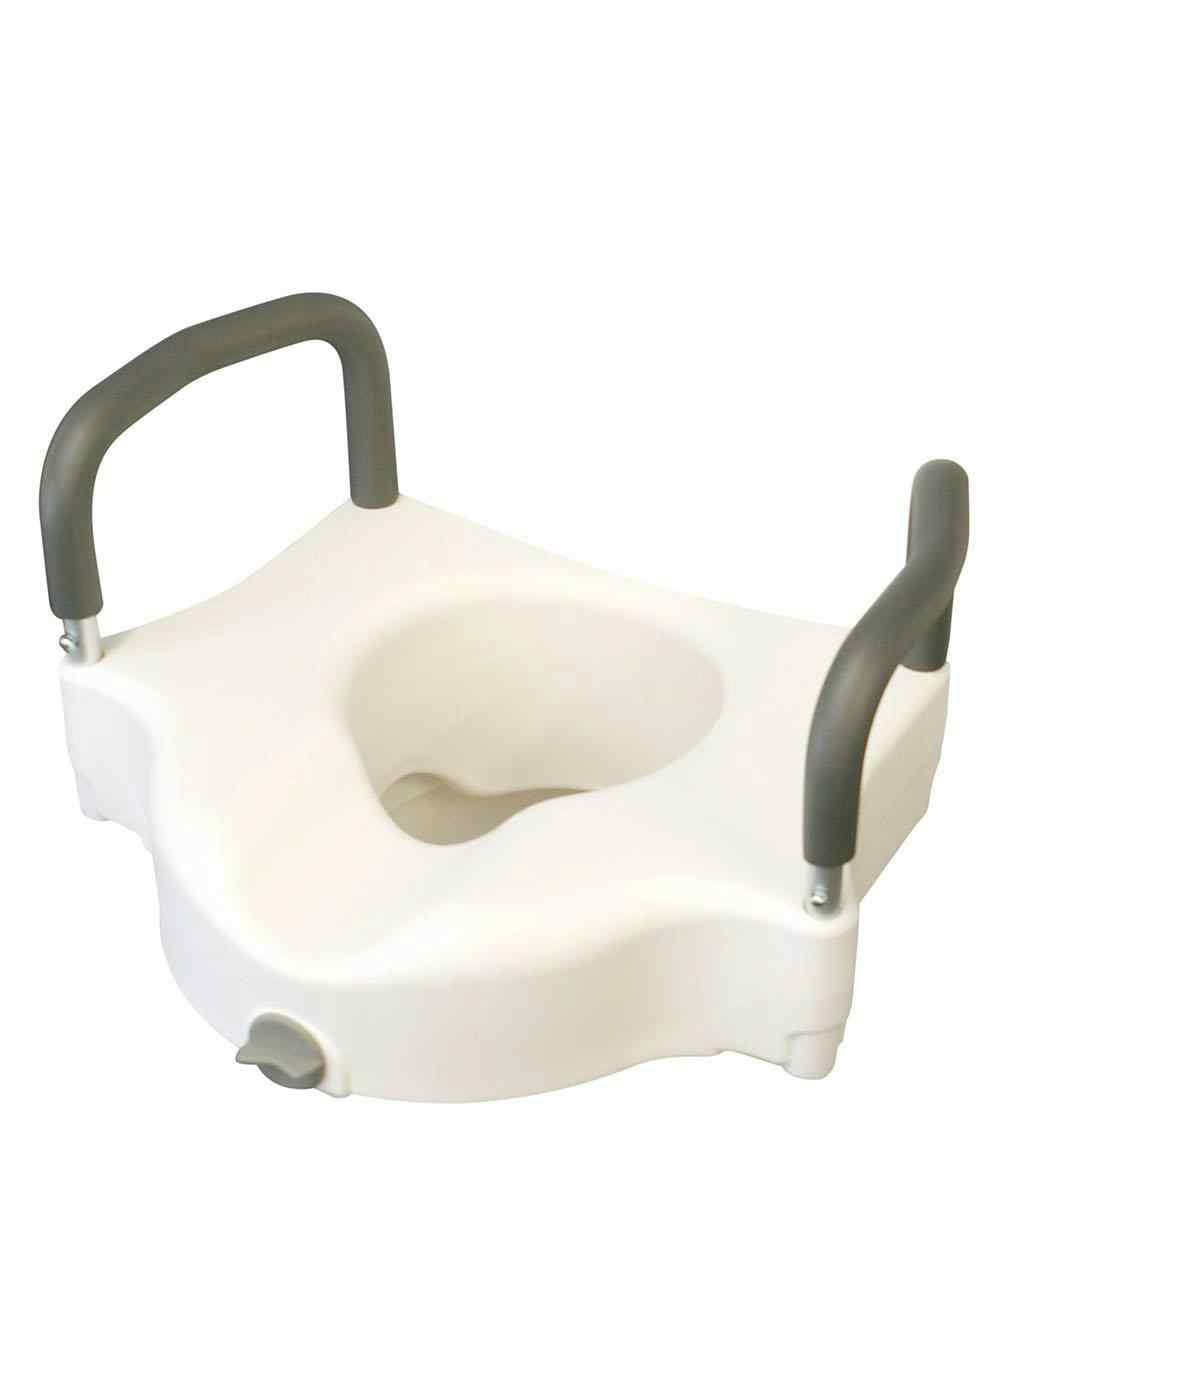 Medline Locking Elevated Toilet Seat with Microban, MDS80316, White - 1 Each